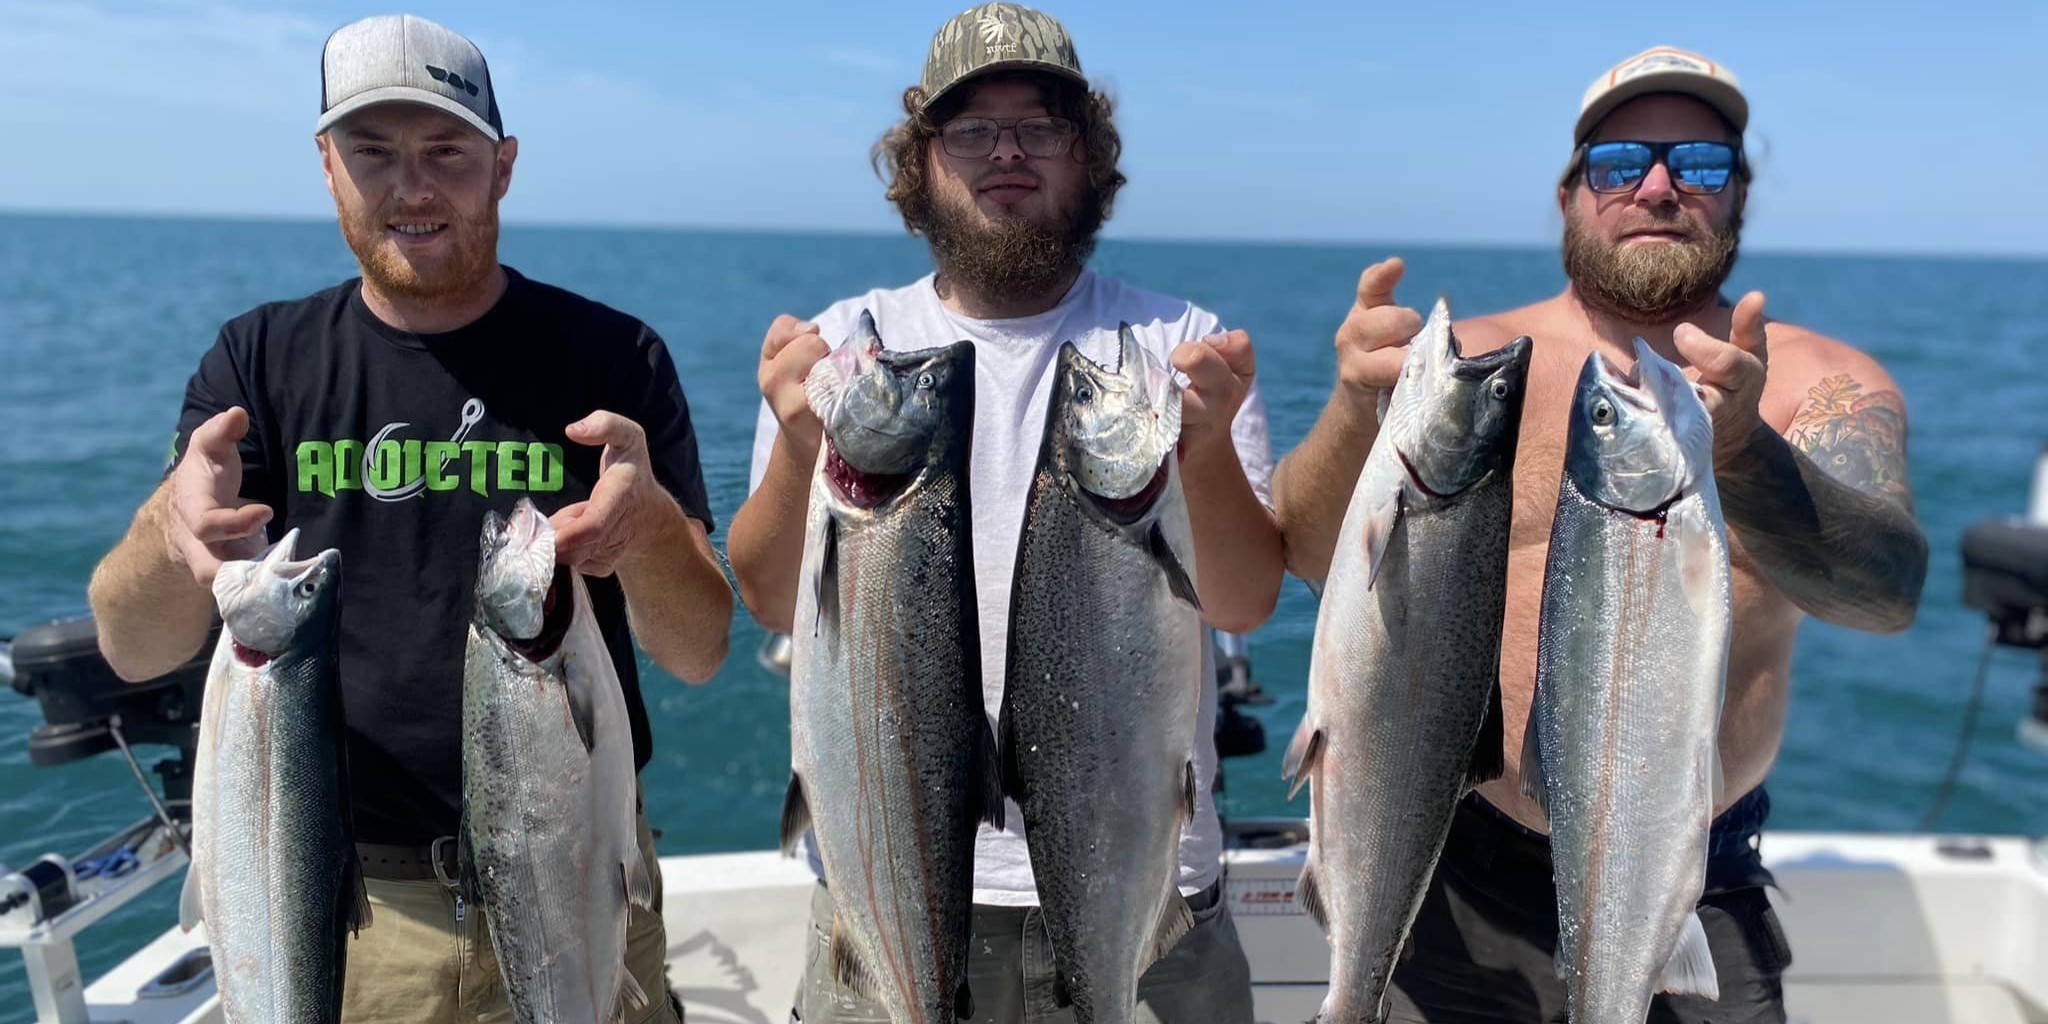 Lake Ontario Fishing Charters | Half Day To Full Day Fishing Excursions